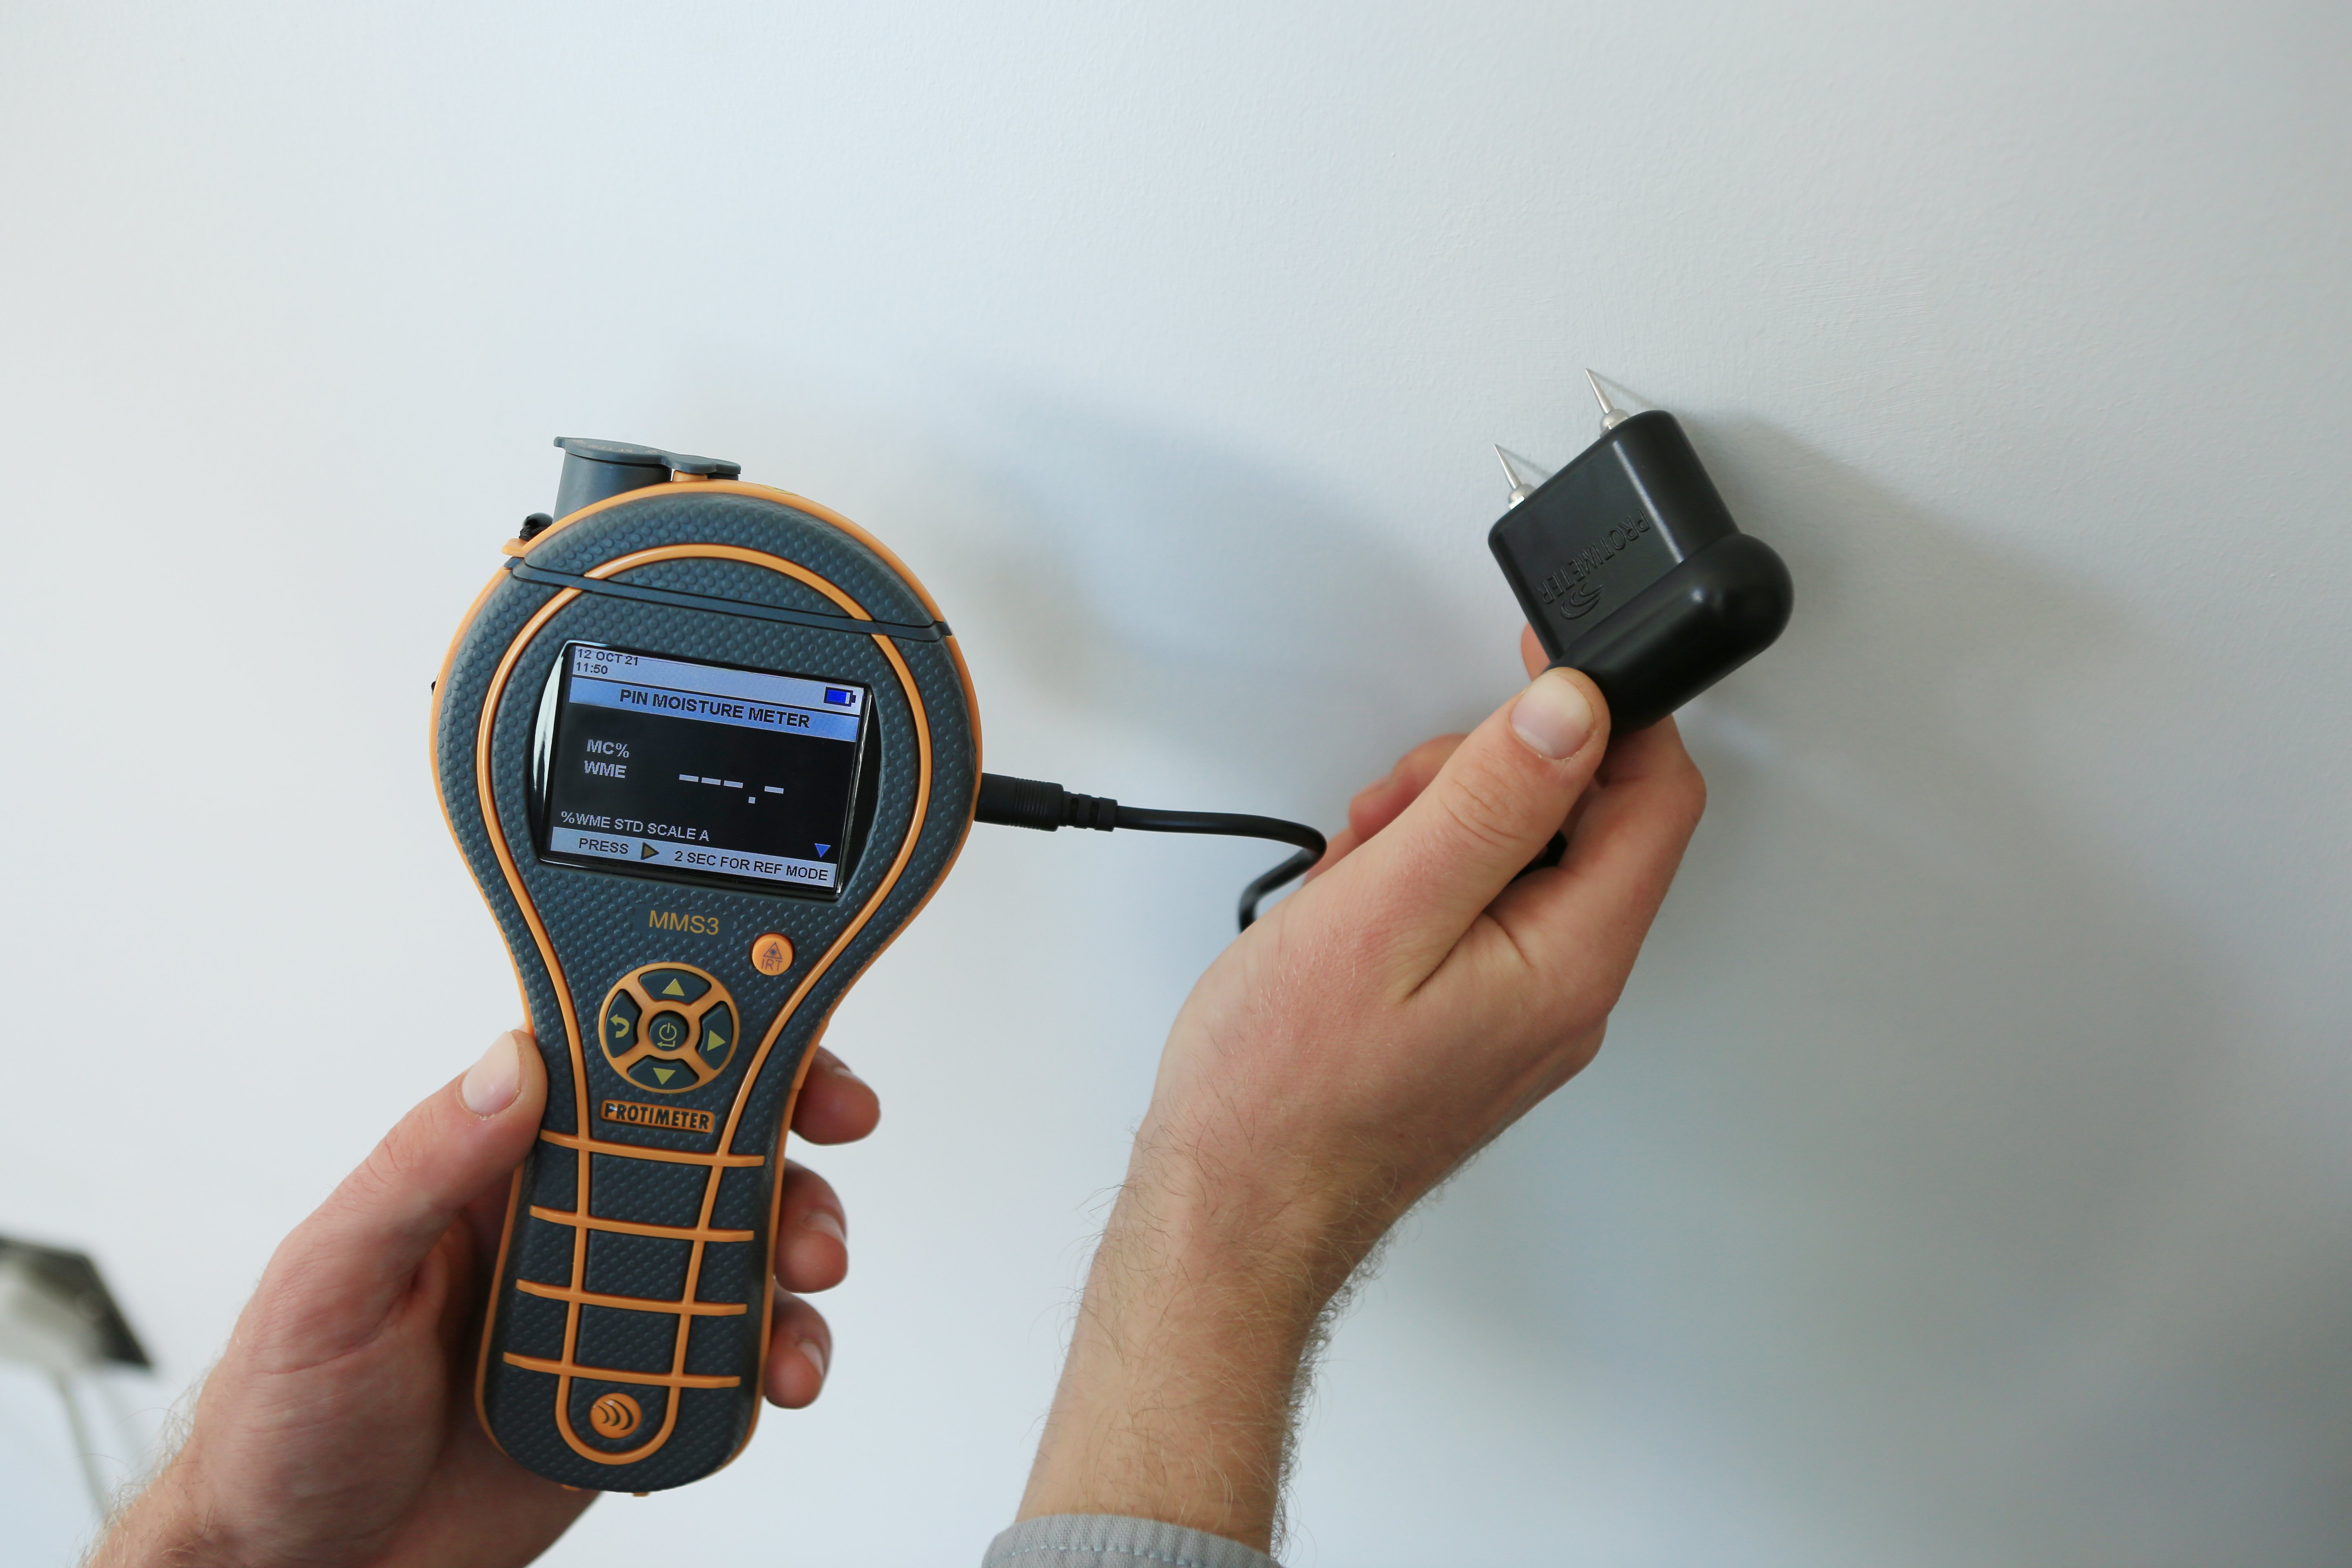 Pin Moisture meter with extension plaster